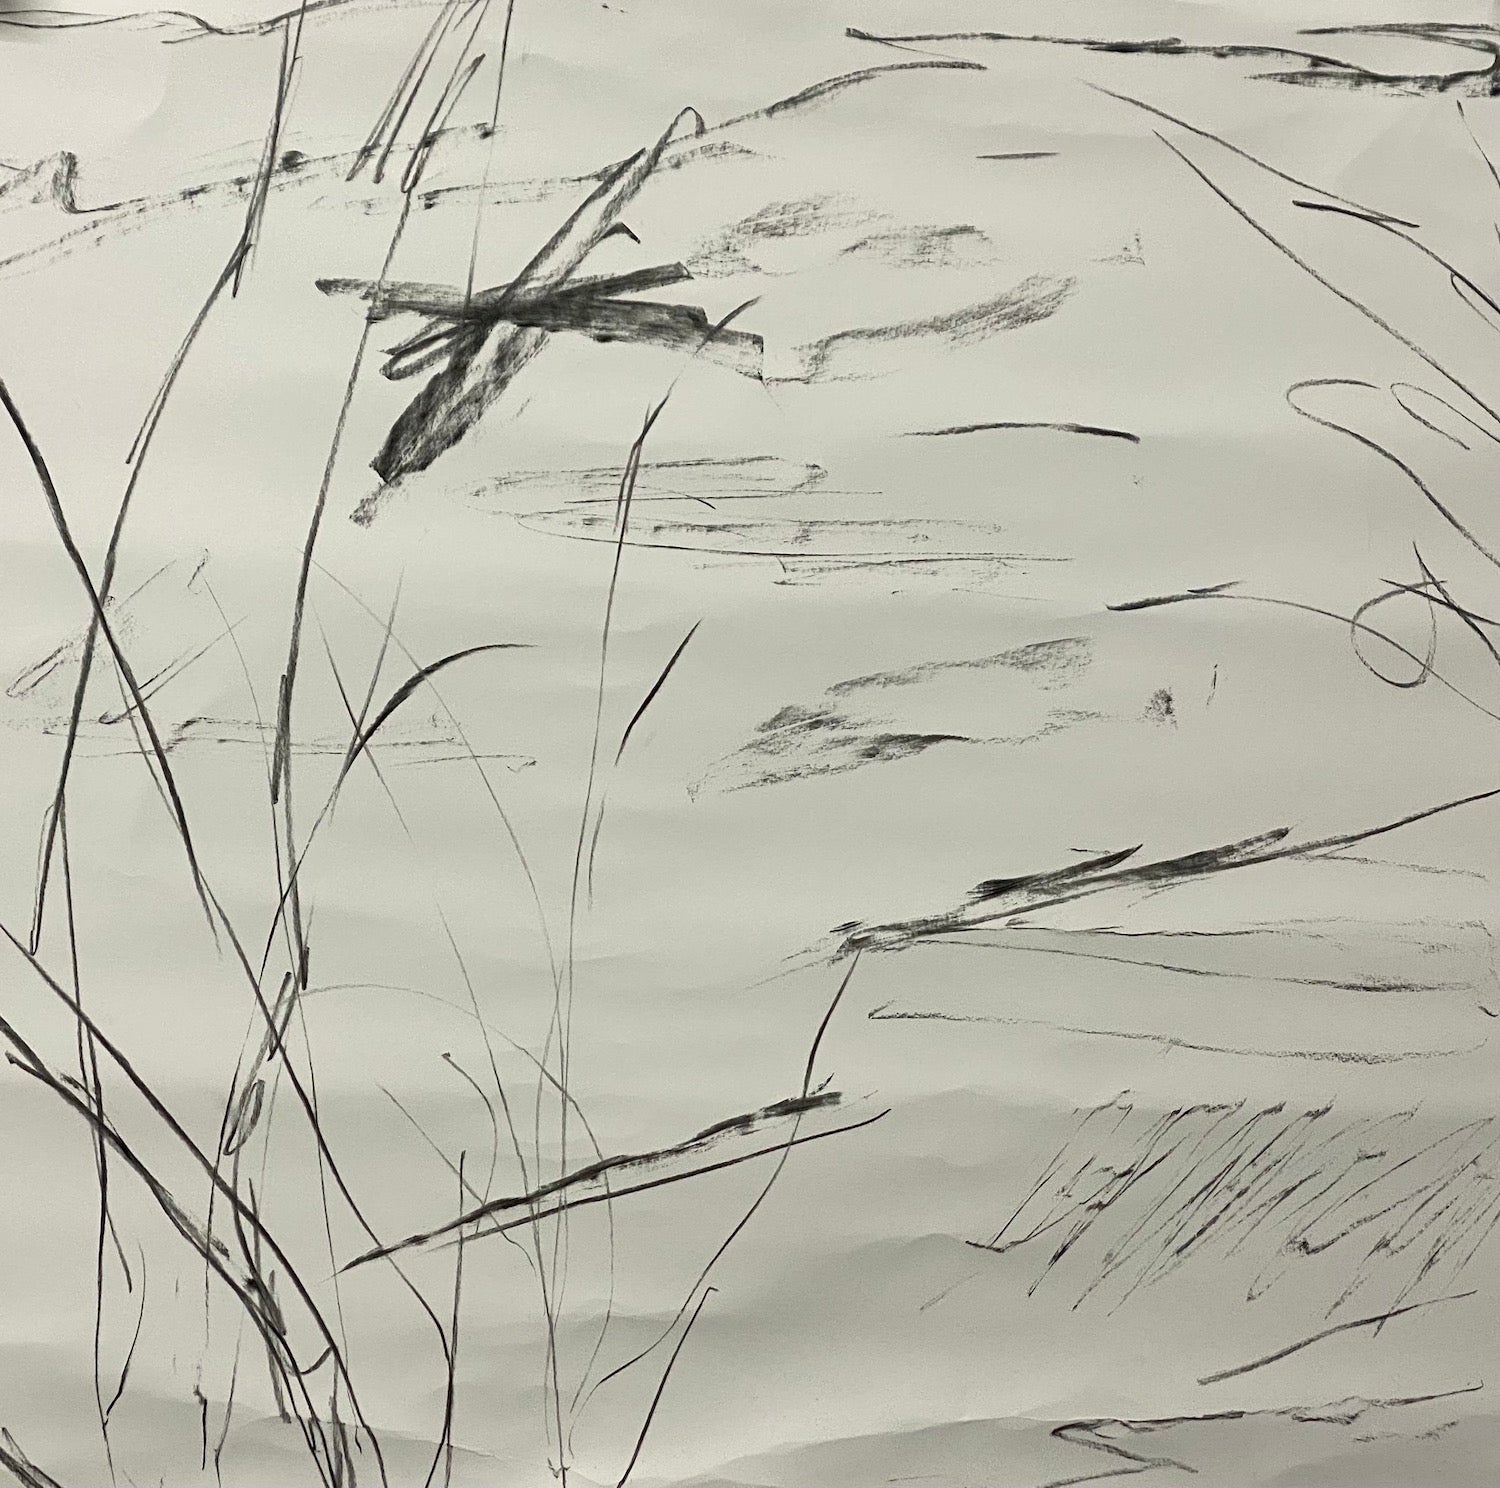 Juanita Bellavance, Pause and focus concept drawing, From the Chestatee River portfolio, 2021, Charcoal on paper, 24 x 24 inches